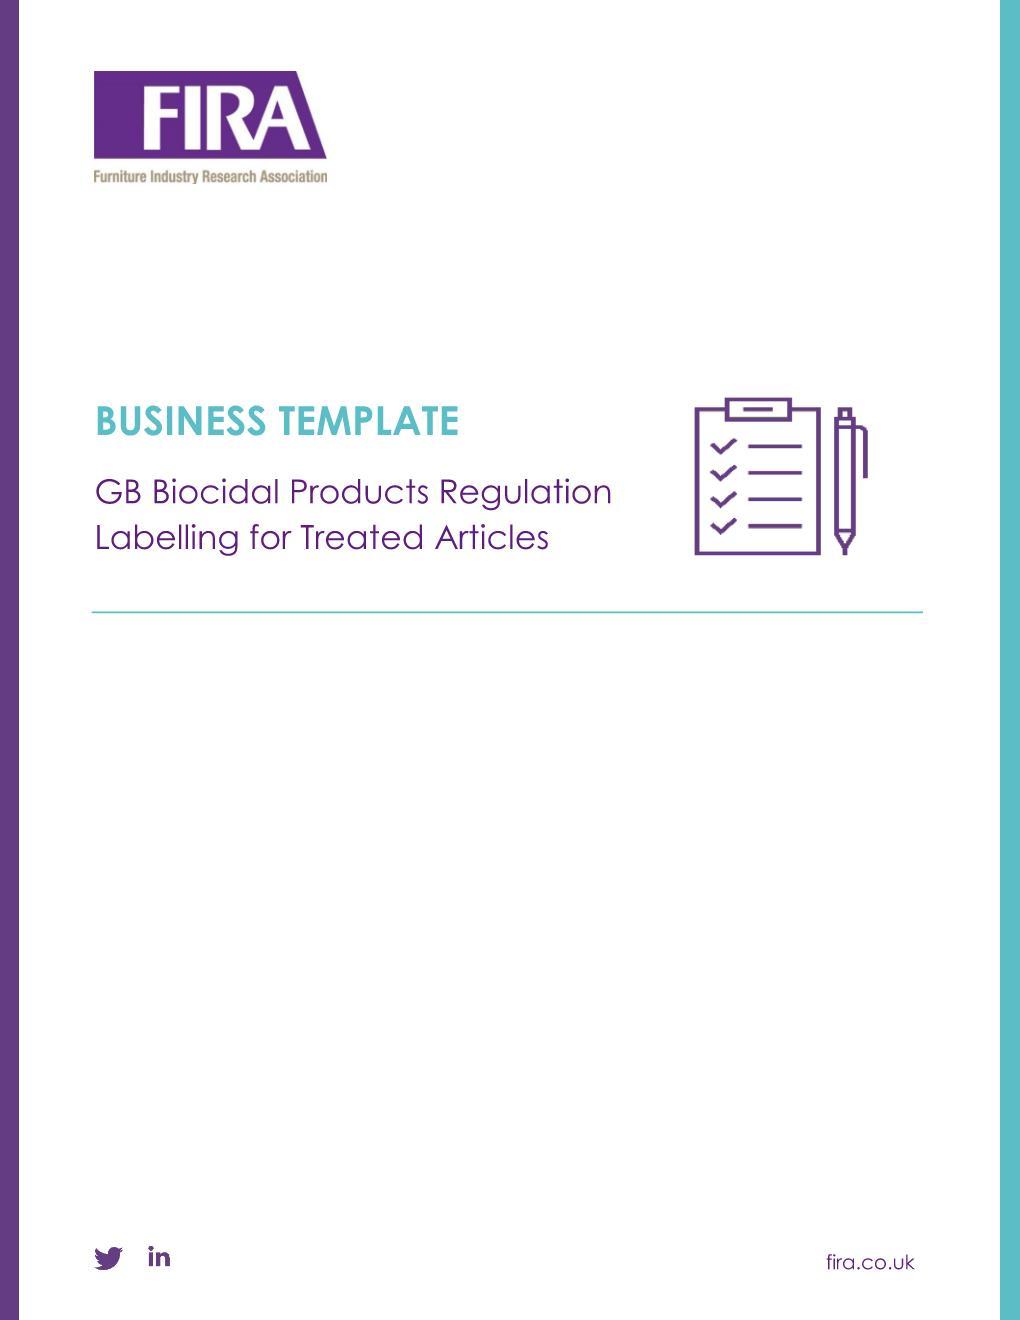 GB Biocidal Products Regulation (BPR) - Labelling Treated Articles Template